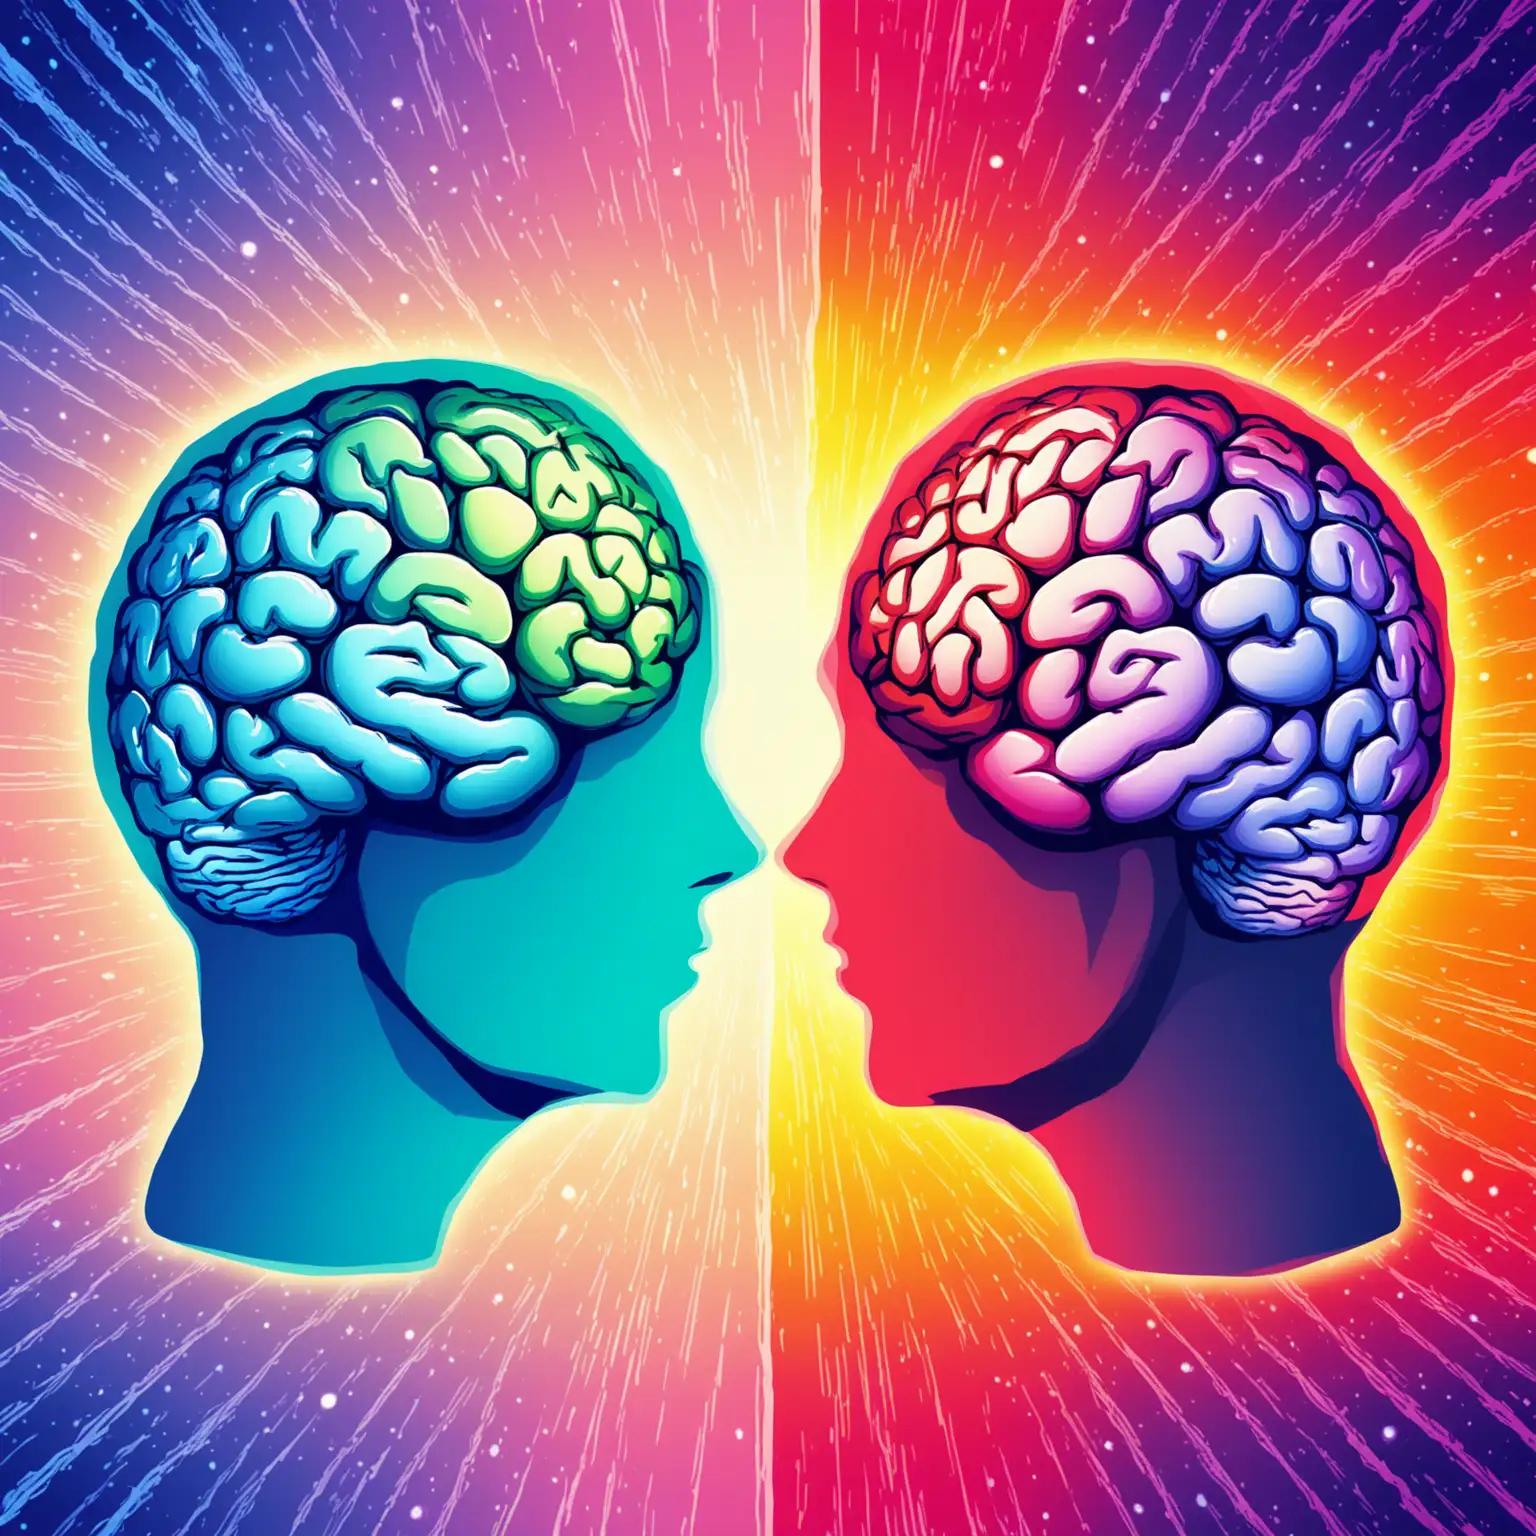 Vibrant Brain Illustrations Facing Each Other